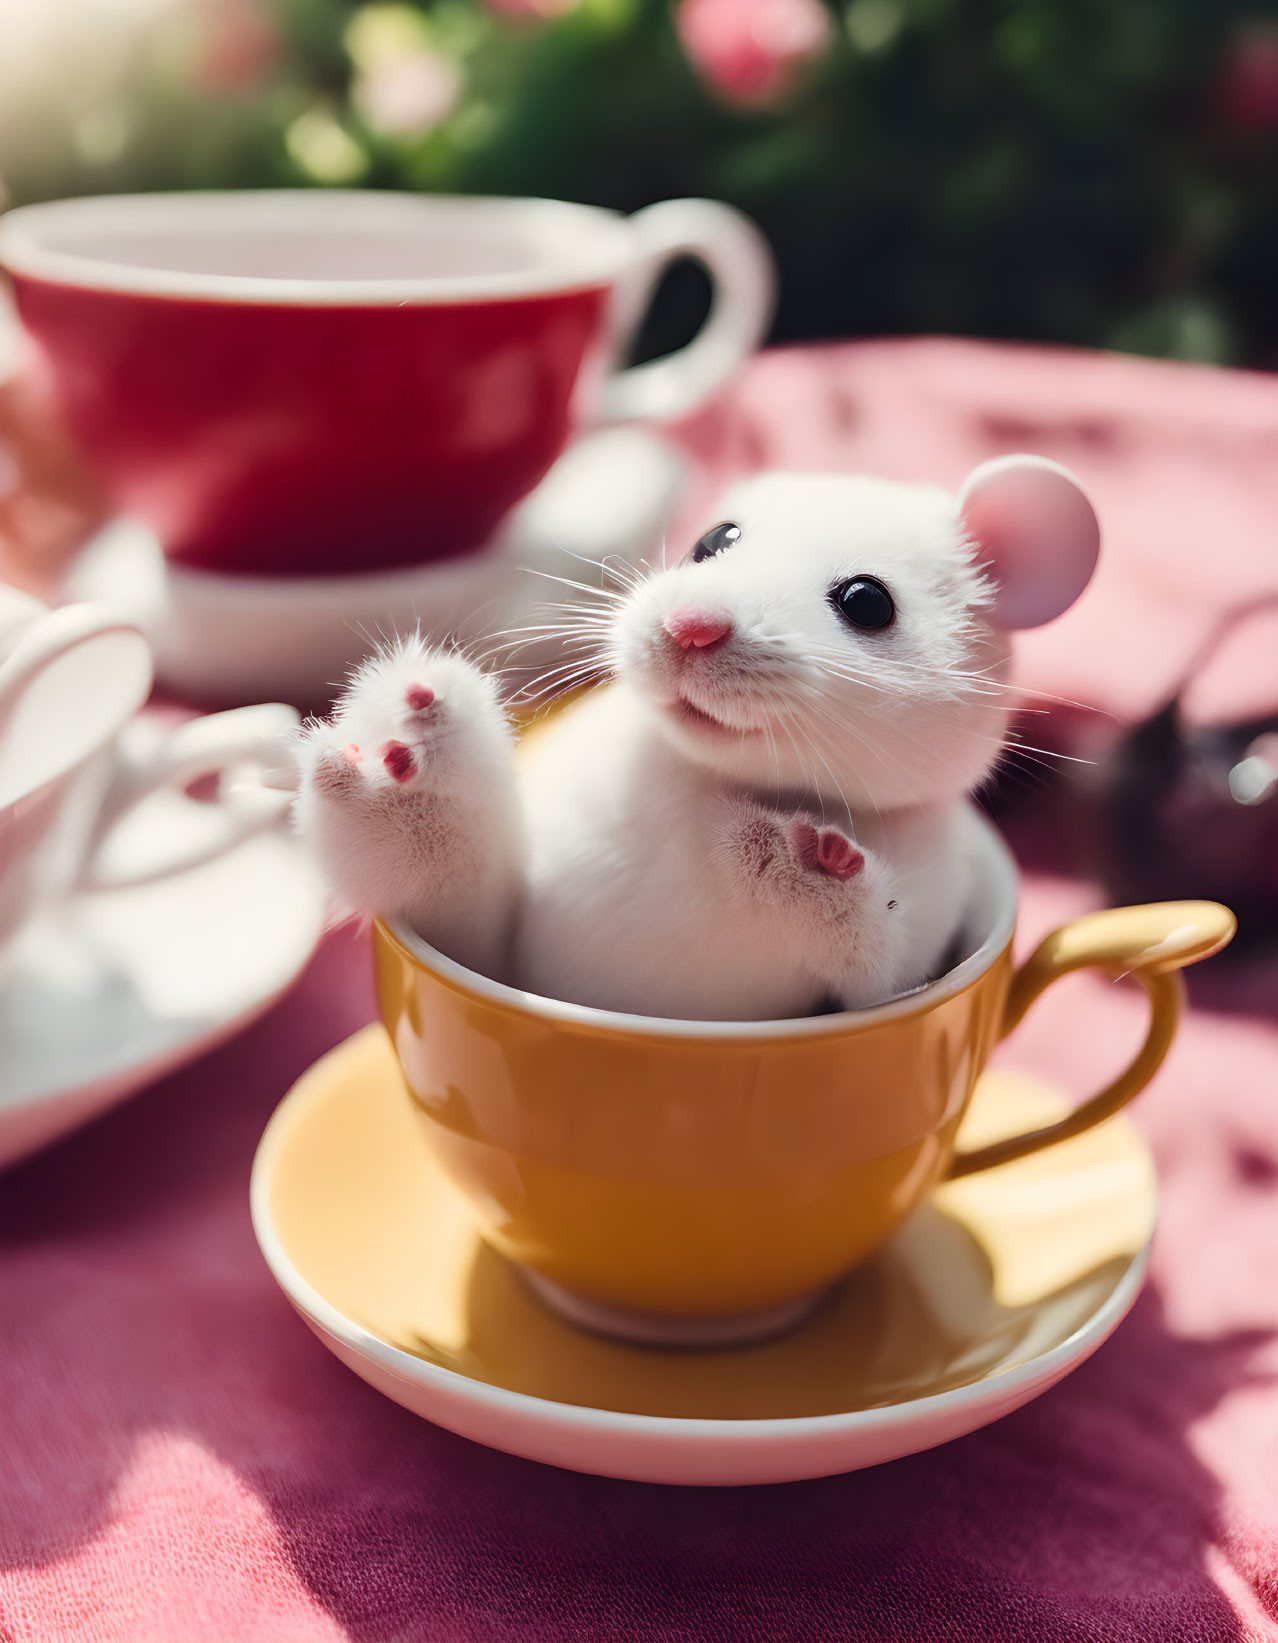 White Mouse Sitting in Yellow Teacup with Pink Backdrop